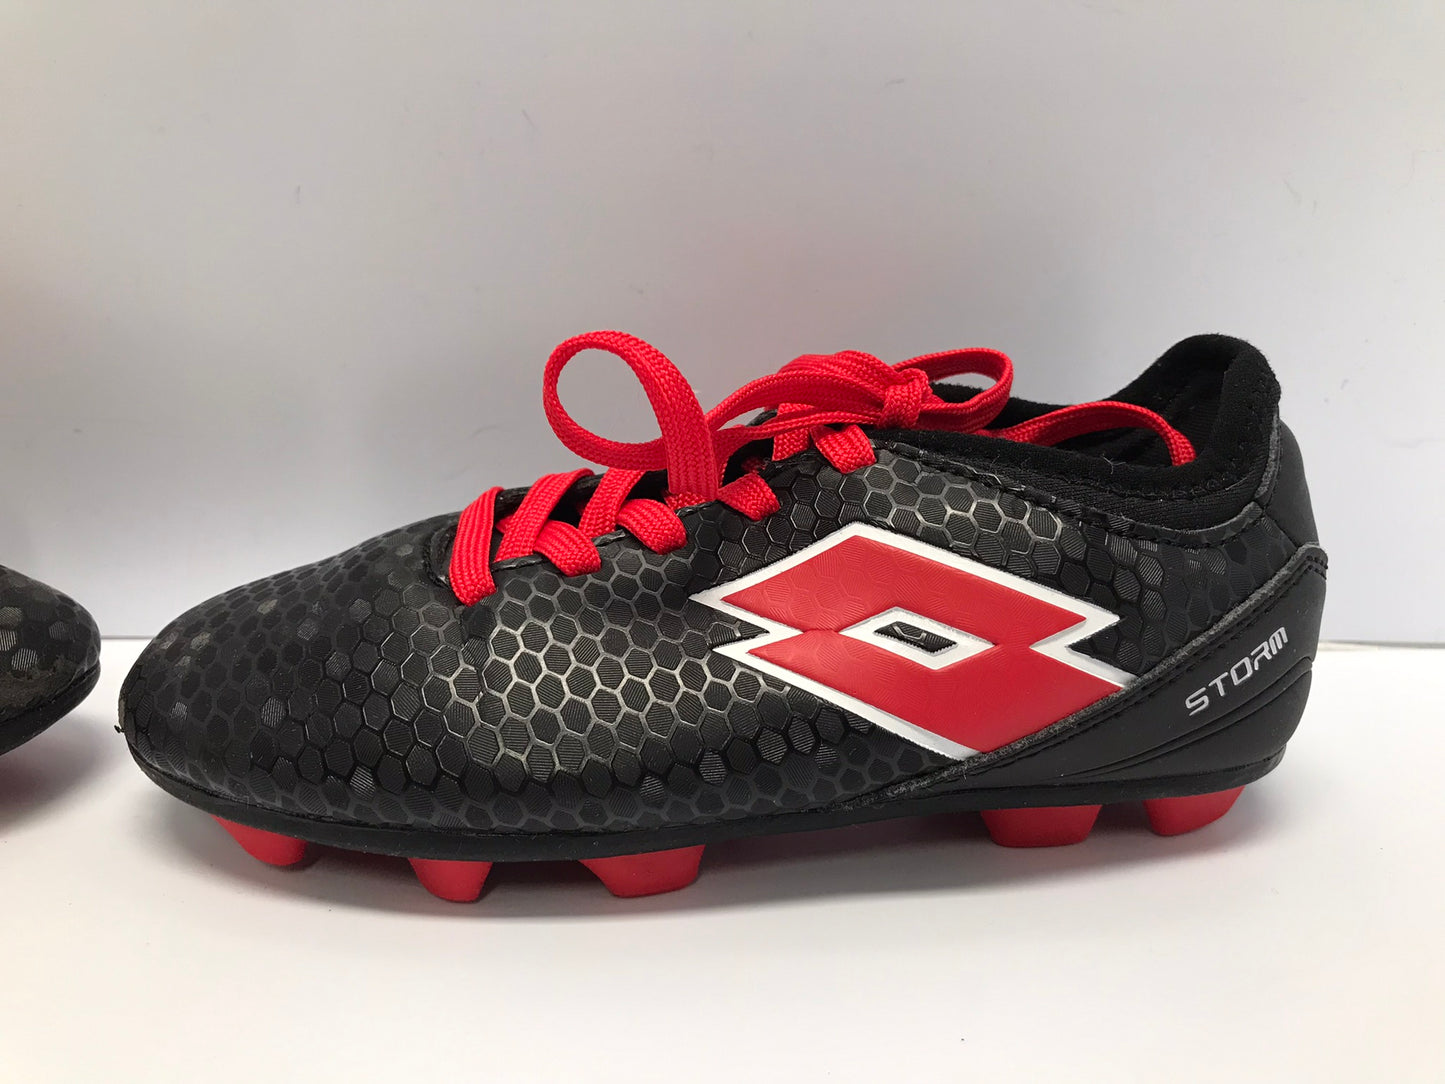 Soccer Shoes Cleats Child Size 12 Lotto Black Red New Demo Model